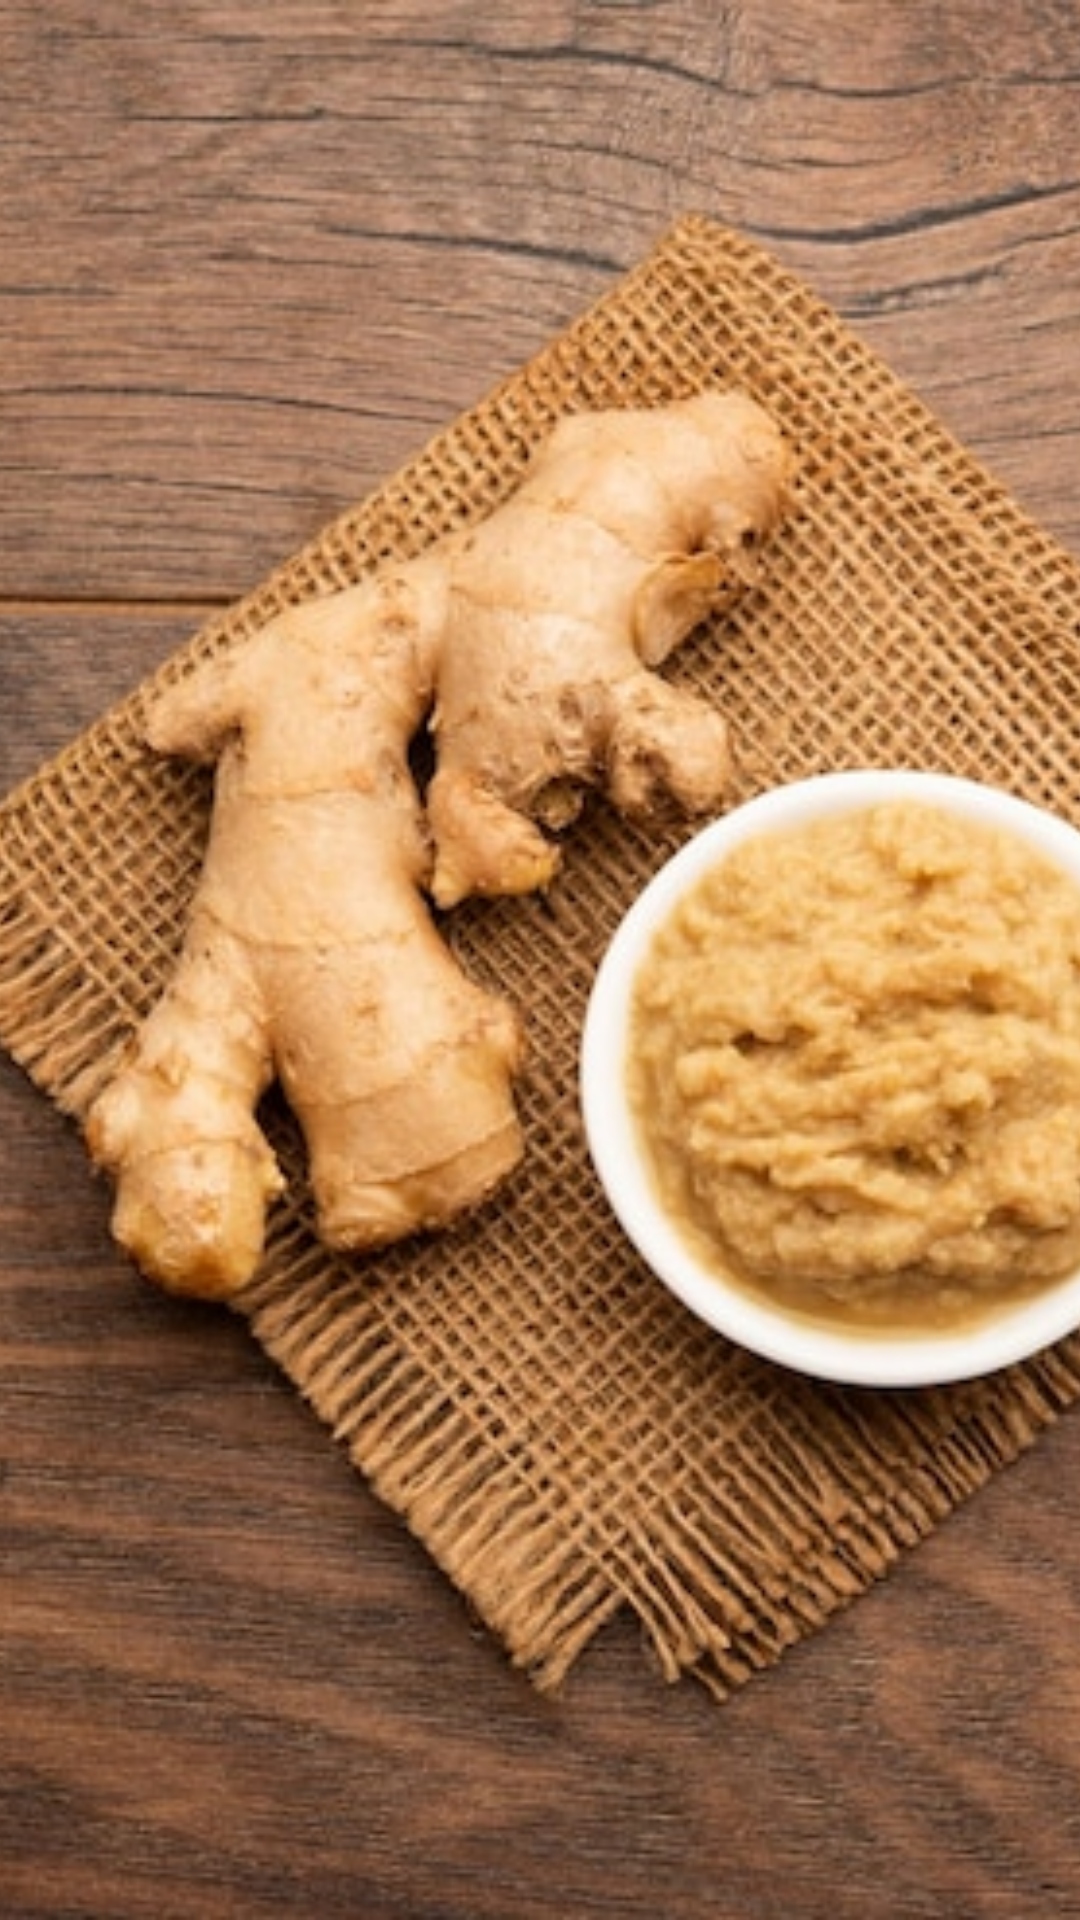 5 side-effects of ginger you should know